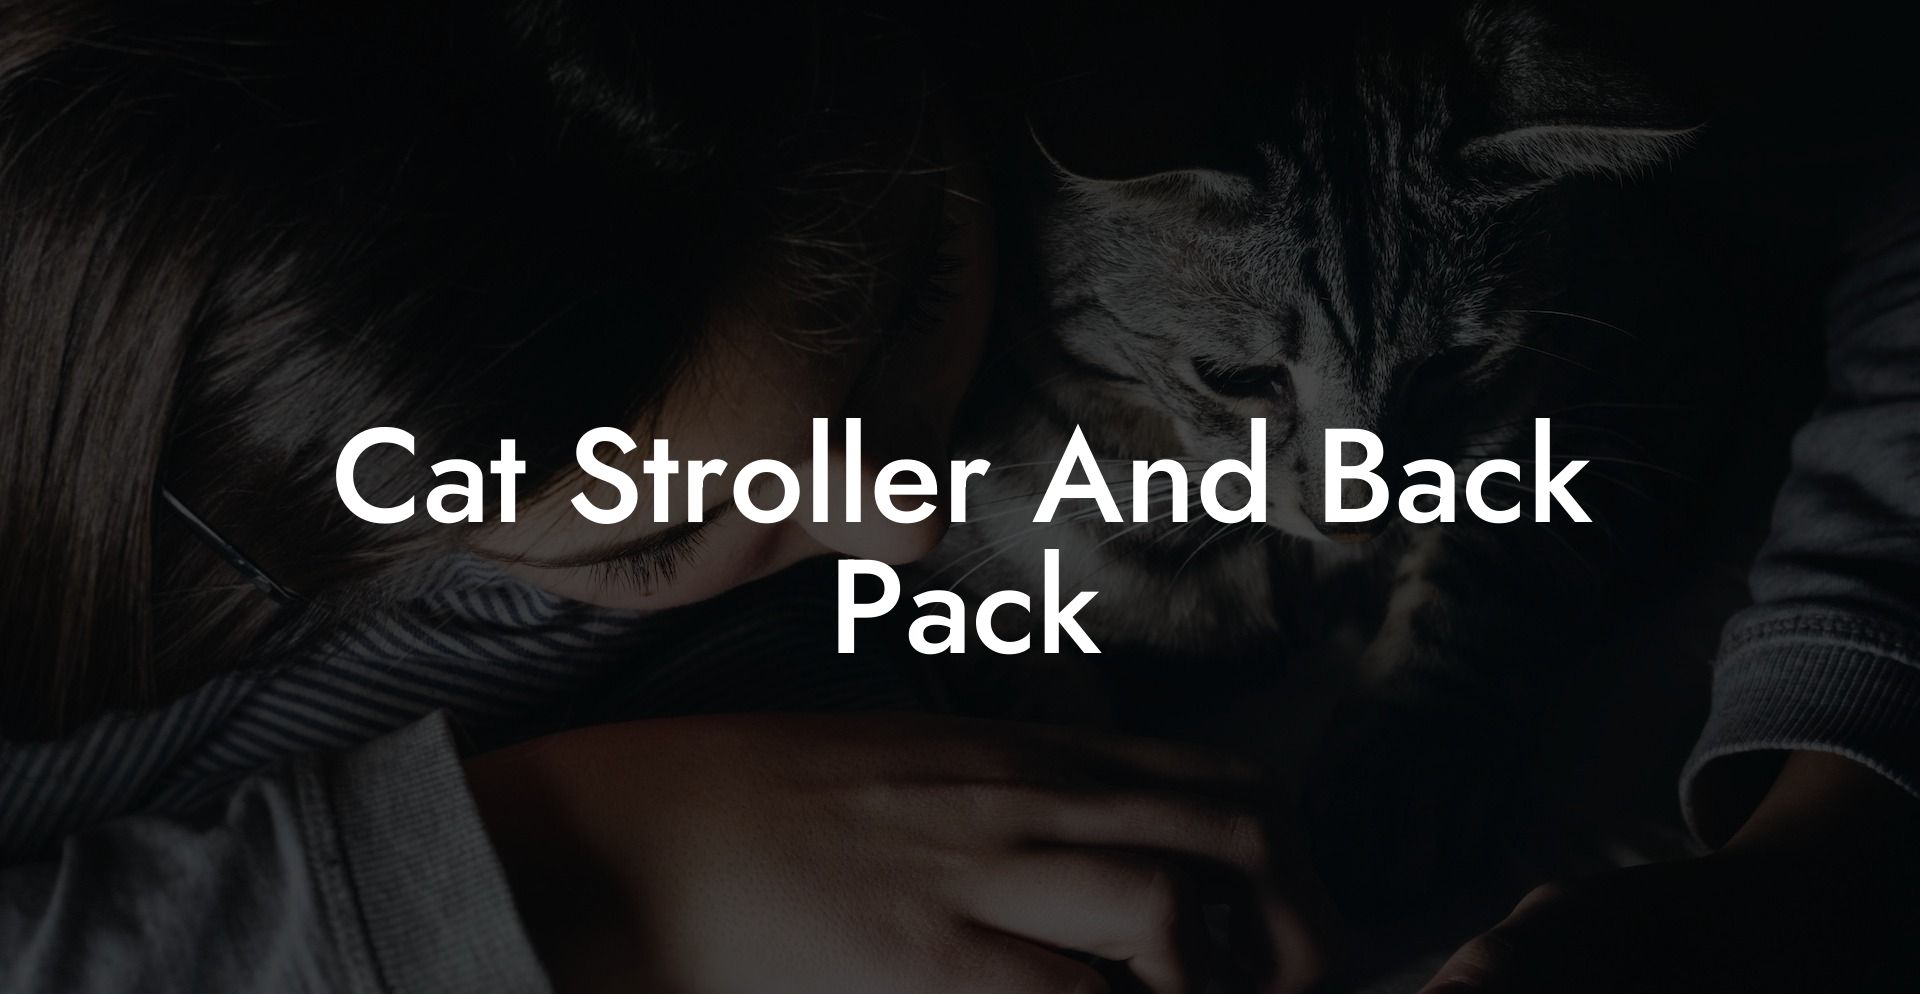 Cat Stroller And Back Pack